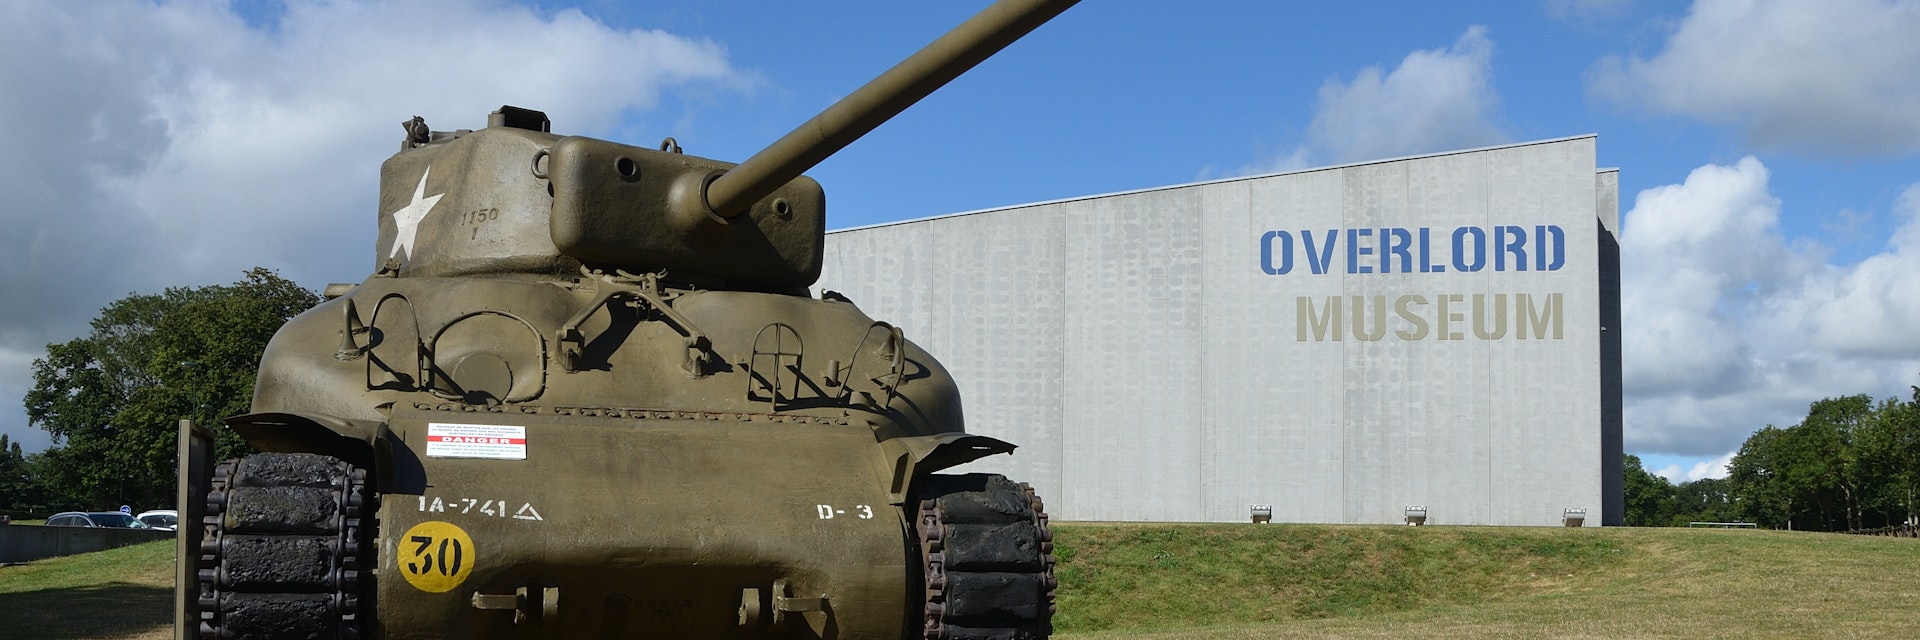 Sherman tank at the Overlord Museum.